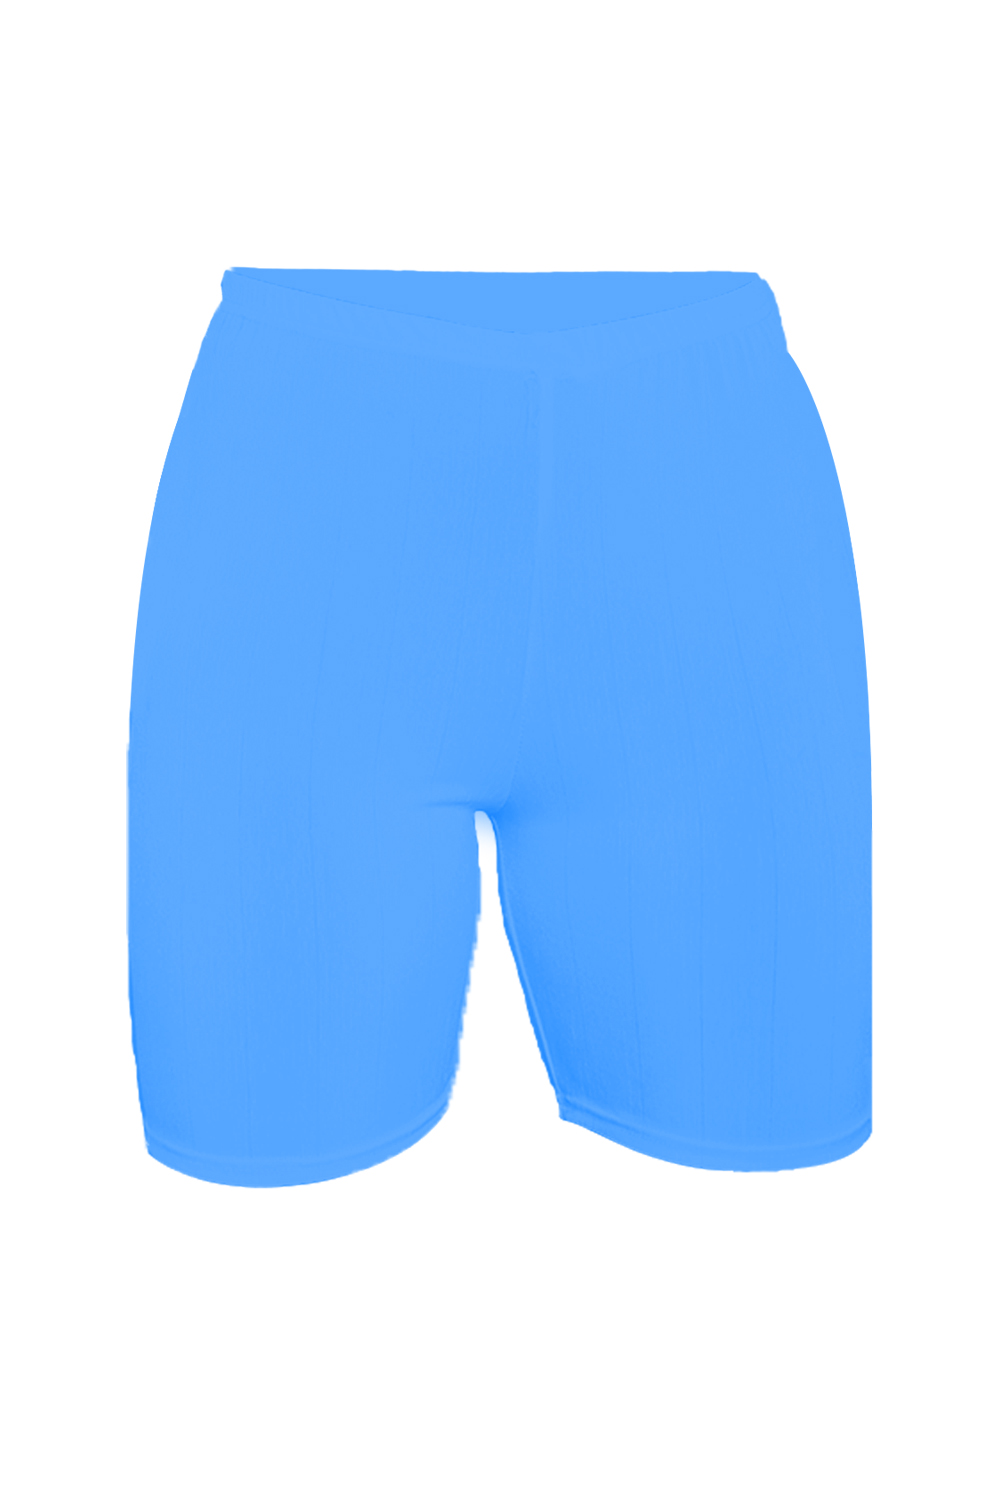 Crazy Chick Adult Turquoise Microfibre Cycling Shorts for Sports and Gym